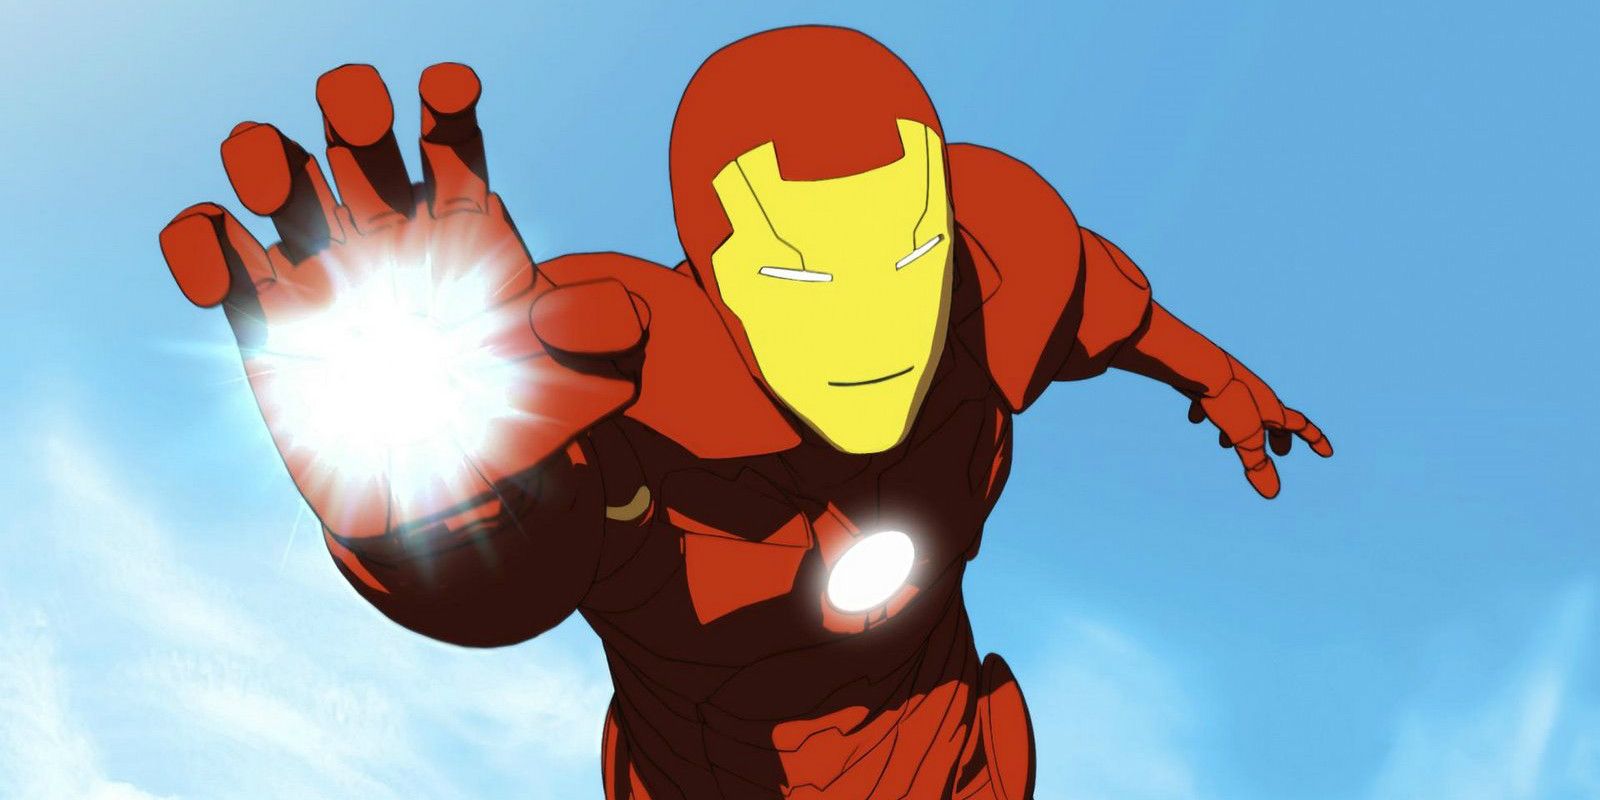 Iron Man firing a hand beam in Armored Adventures Close Up